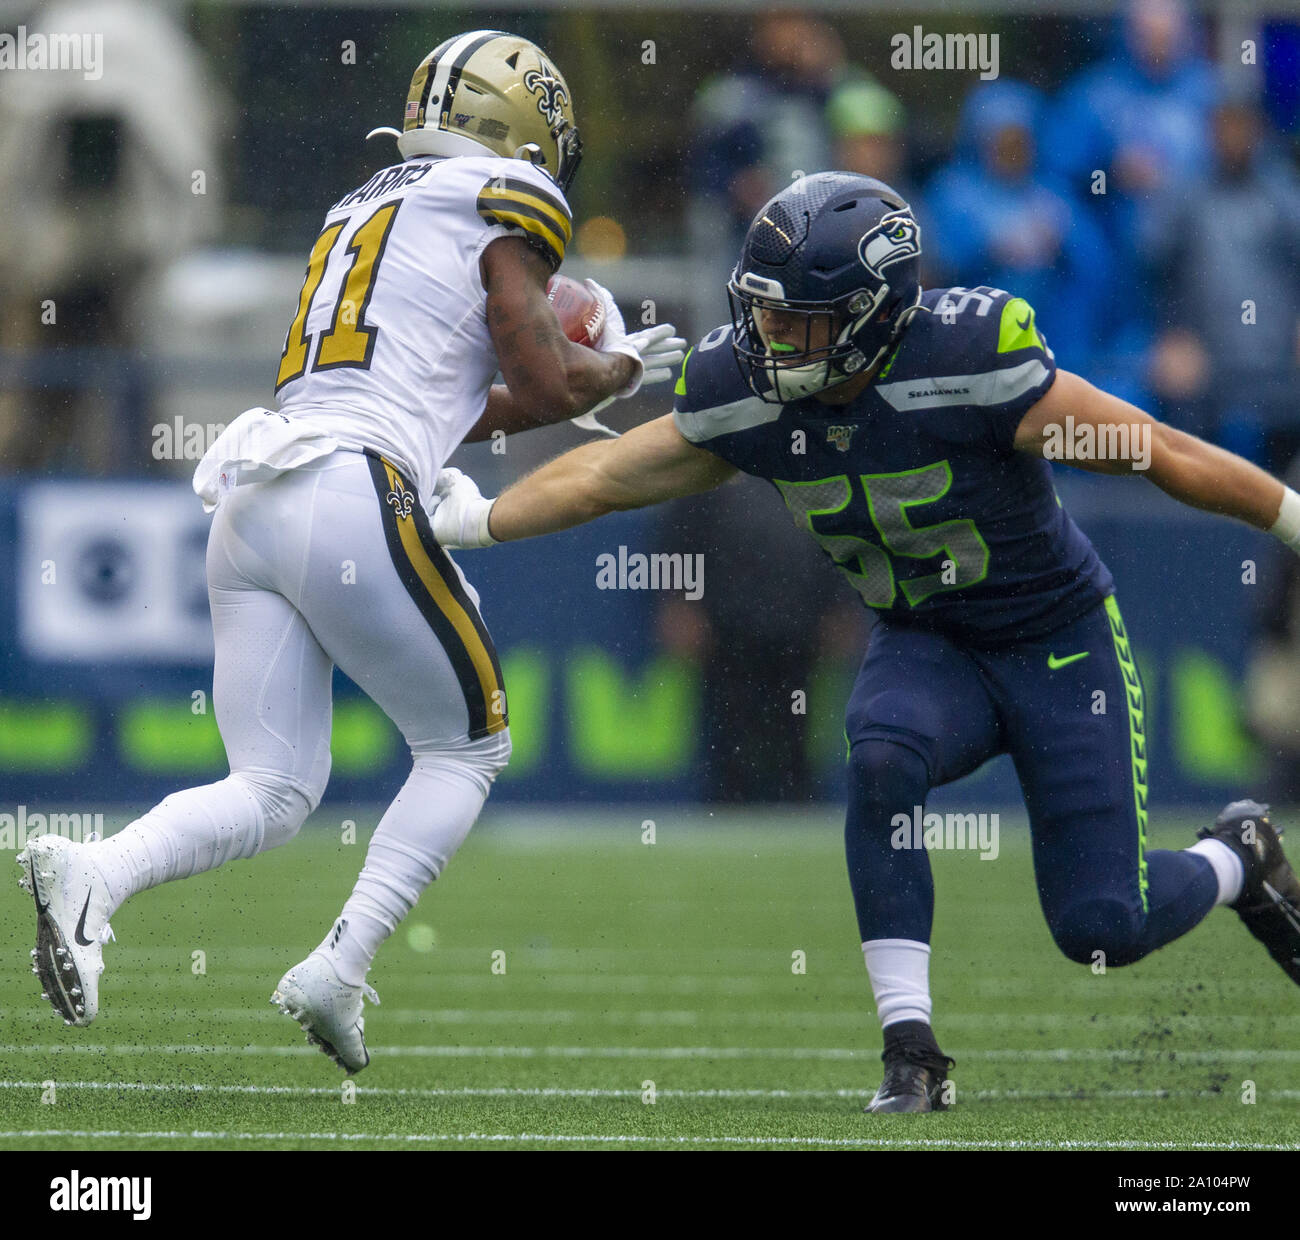 Seattle, USA. 22nd Sep, 2019. New Orleans Saints wide receiver Deonte Harris (11) breaks a tackle by Seattle Seahawks linebacker Ben Burr-Kirven (55) while running back 53-yard touchdown during the first quarter at CenturyLink Field on Sunday, September 22, 2019 in Seattle, Washington. New Orleans Saints beat the Seattle Seahawks 33-27. Photo by Jim Bryant/UPI Credit: UPI/Alamy Live News Stock Photo